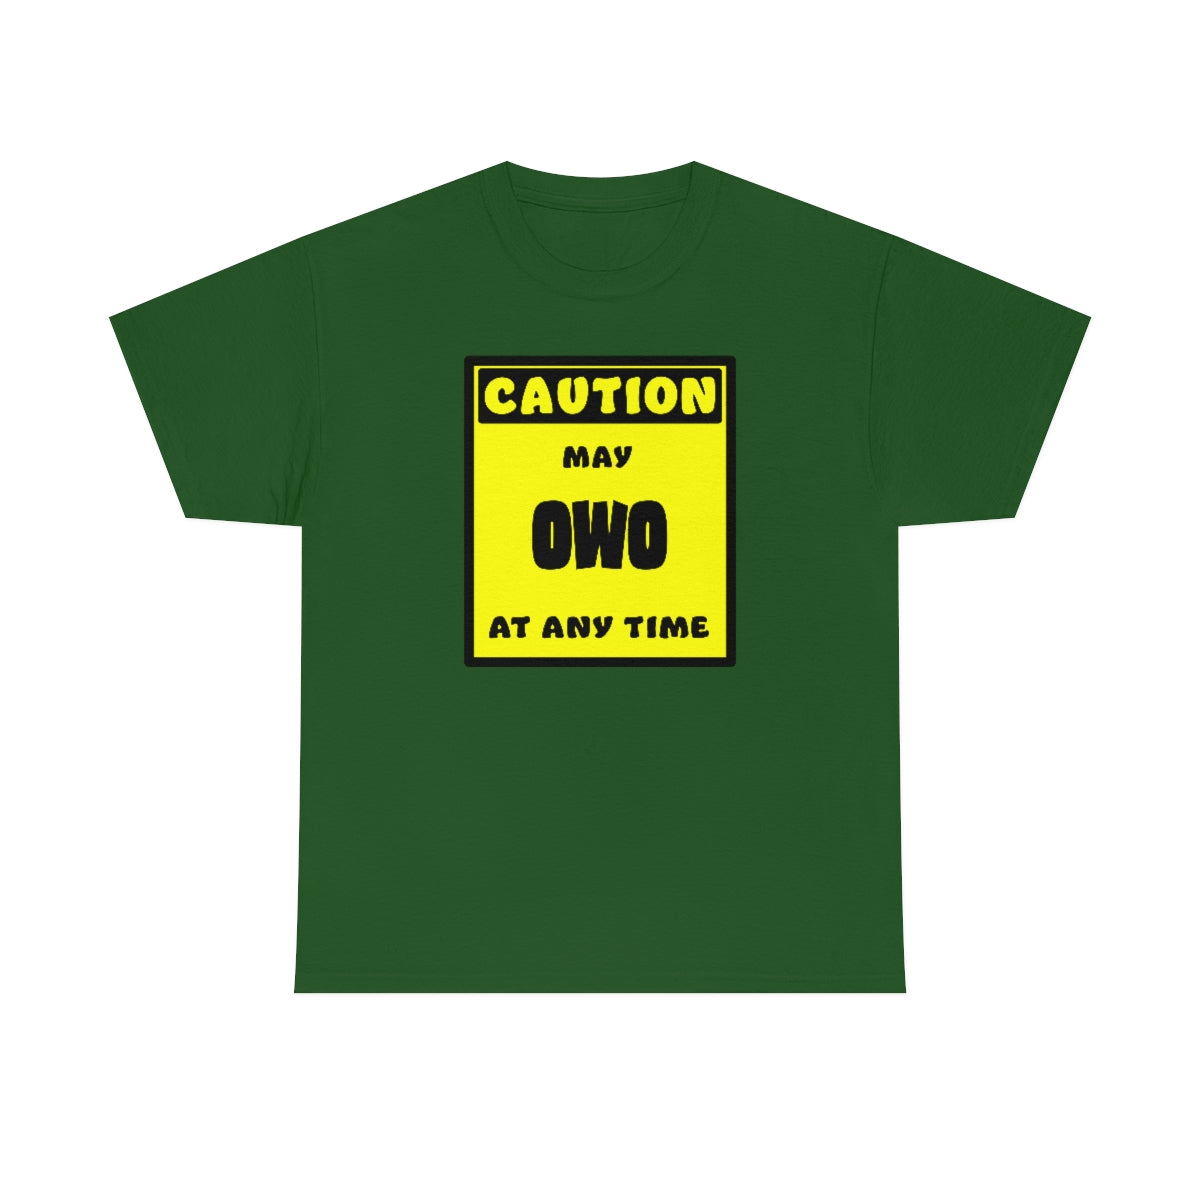 CAUTION! May OWO at any time! - T-Shirt T-Shirt AFLT-Whootorca Green S 